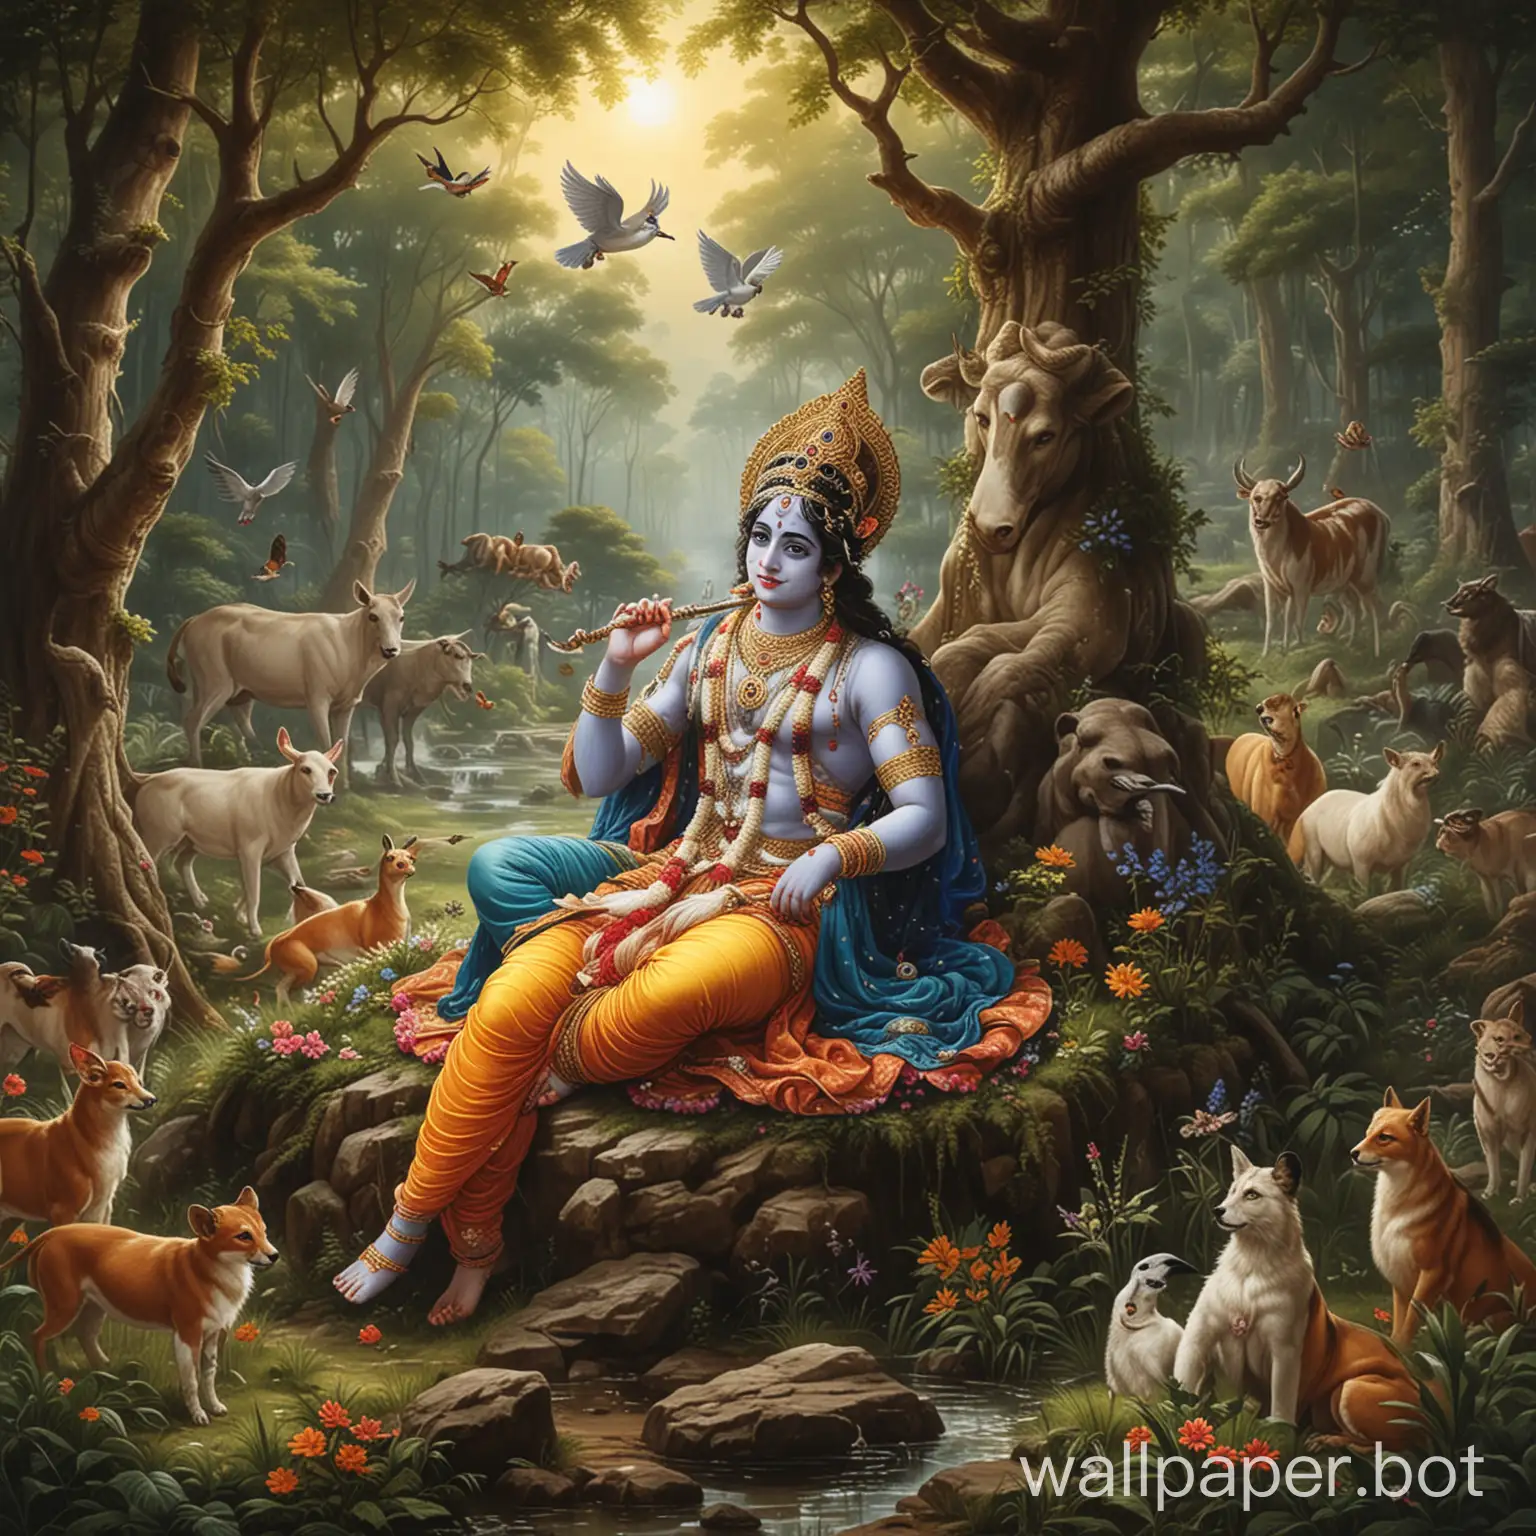 image of lord krishna with lord radha (his friend) sitting in a forest with beautiful environment like animals , plants, bird trees etc